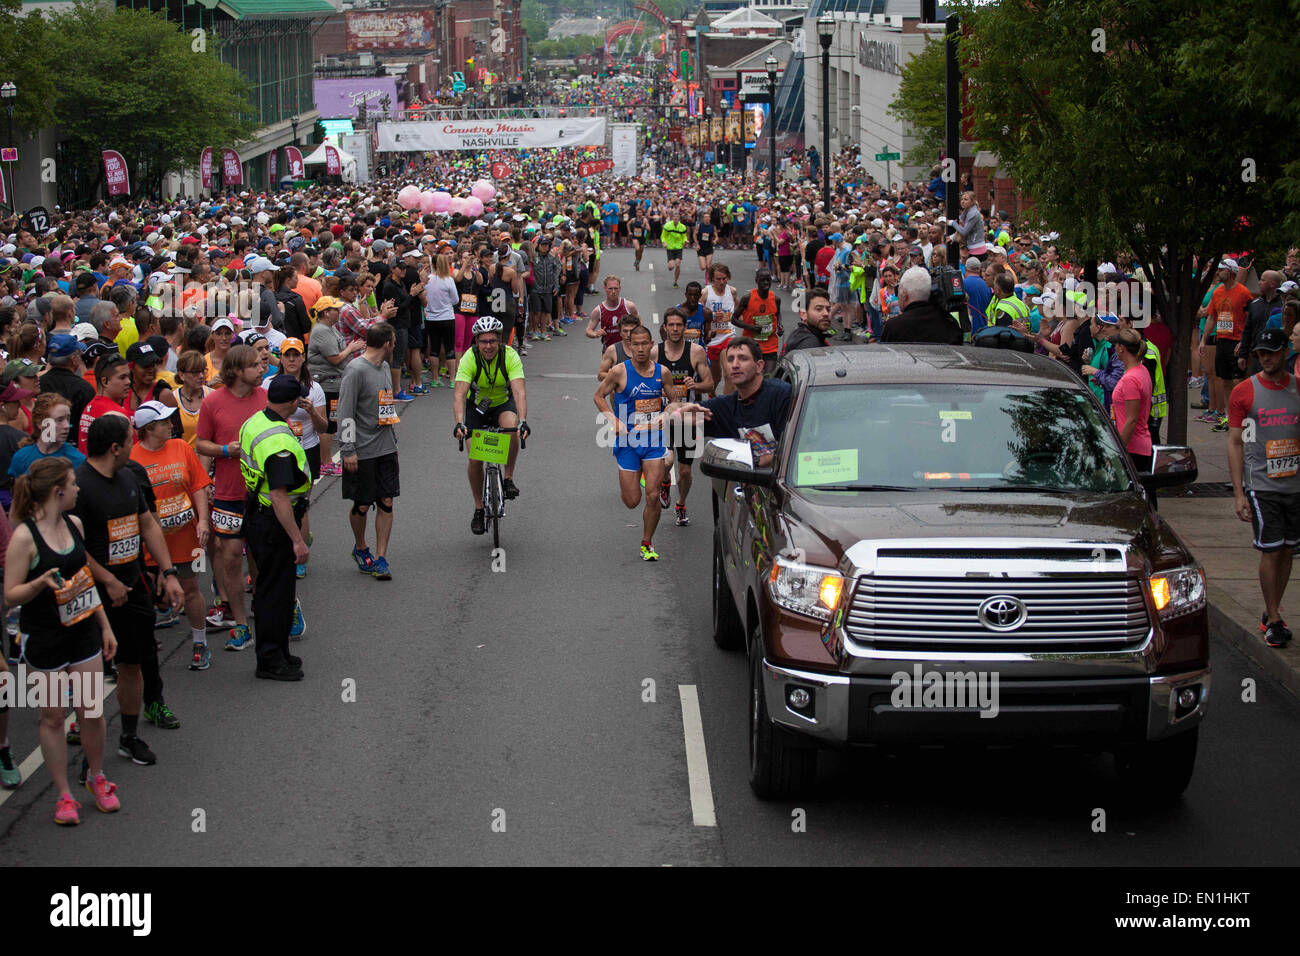 Nashville, Tennessee, USA. 25th Apr, 2015. Race staff clears people from the road as STEVE CHU (center, bib number 203) takes the lead during the St. Jude Country Music Marathon & Half Marathon in Nashville. © Raffe Lazarian/ZUMA Wire/ZUMAPRESS.com/Alamy Live News Stock Photo